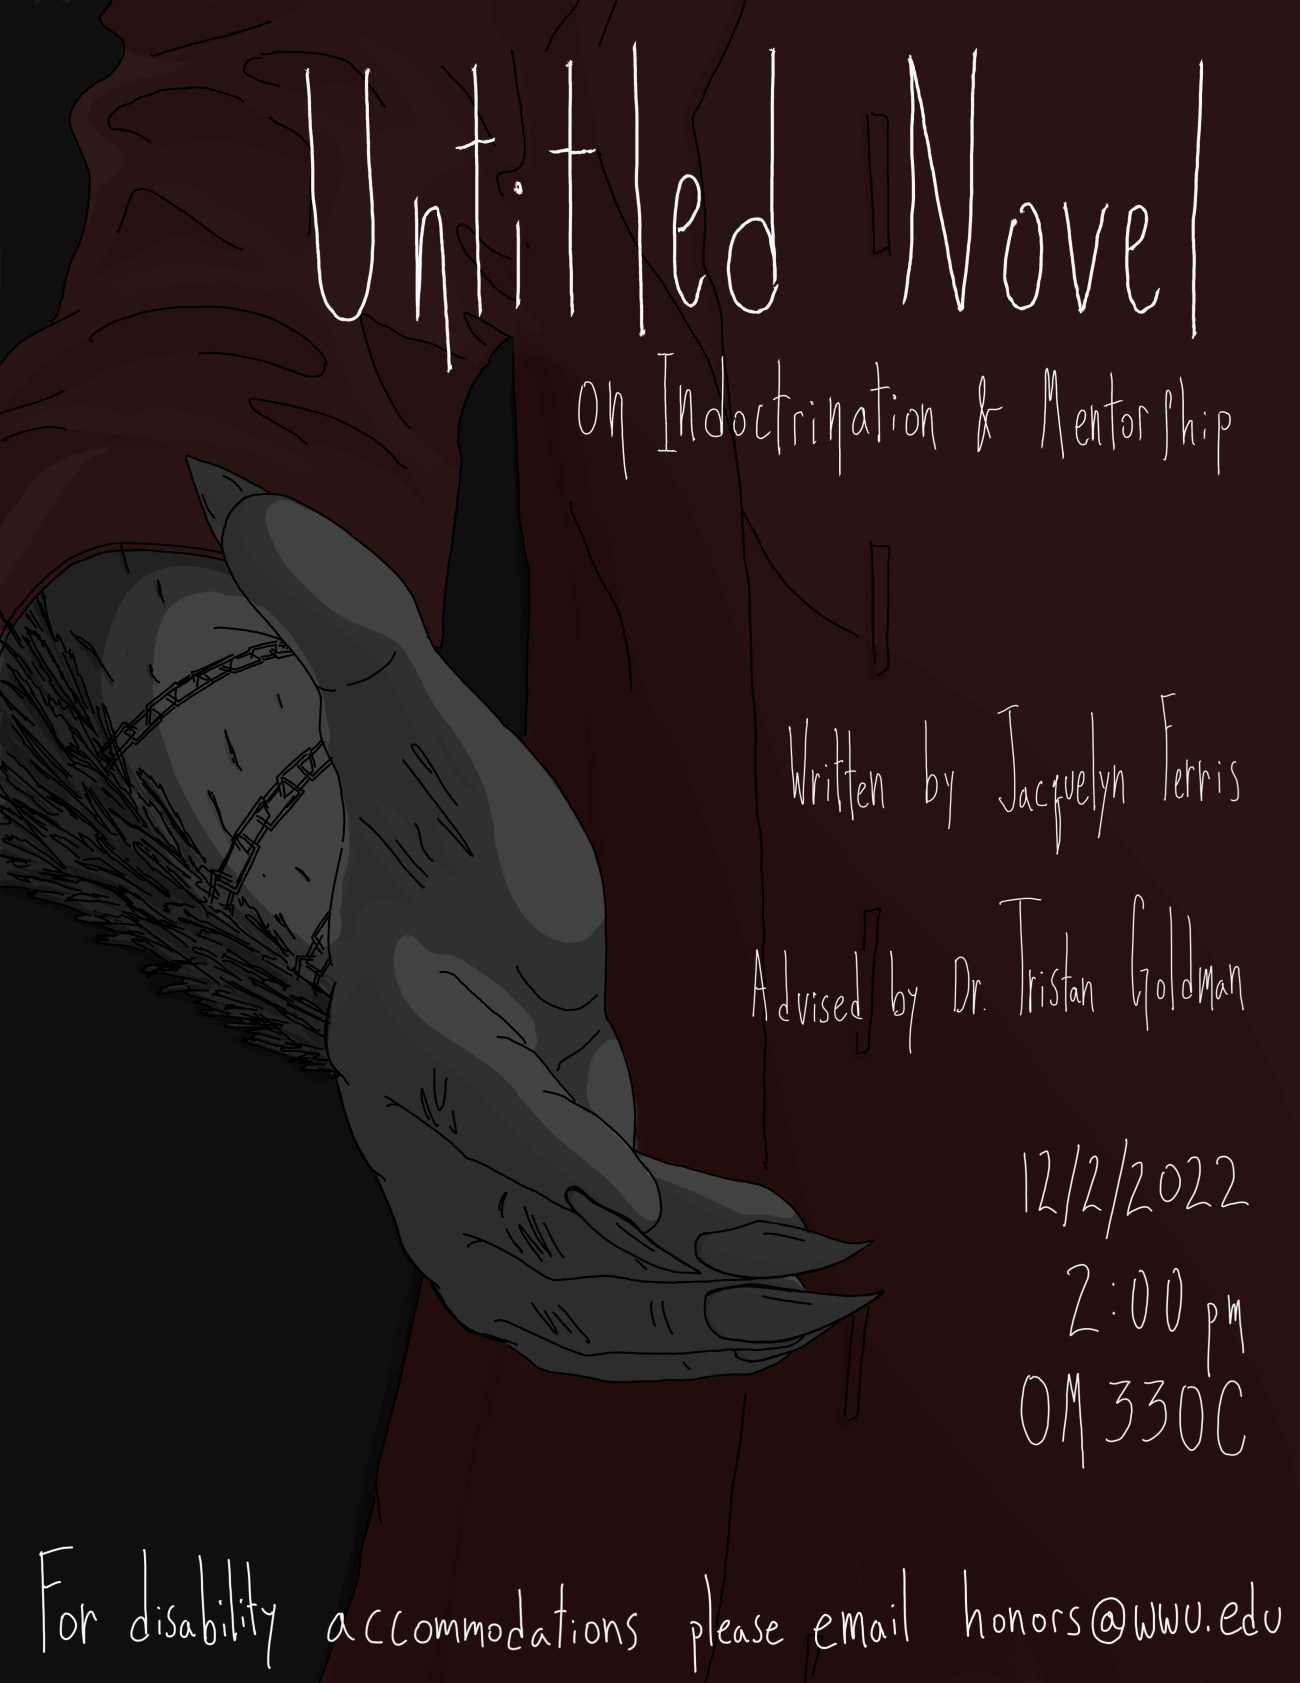 A gray and taloned hand is offering help or perhaps a hand shake to the viewer on the end of a feathered arm. The arm itself is wrapped in a chain, and is extending from a muted red half-sleeved jacket. There is a darker charcoal background with white and willowy hand-written text stands overtop that reads: “Untitled Novel on Indoctrination & Mentorship. Written by Jacquelyn Ferris. Advised by Dr. Tristan Goldman. 12/2/2022 2:00pm OM330C. For disability accommodations please email honors@wwu.edu”